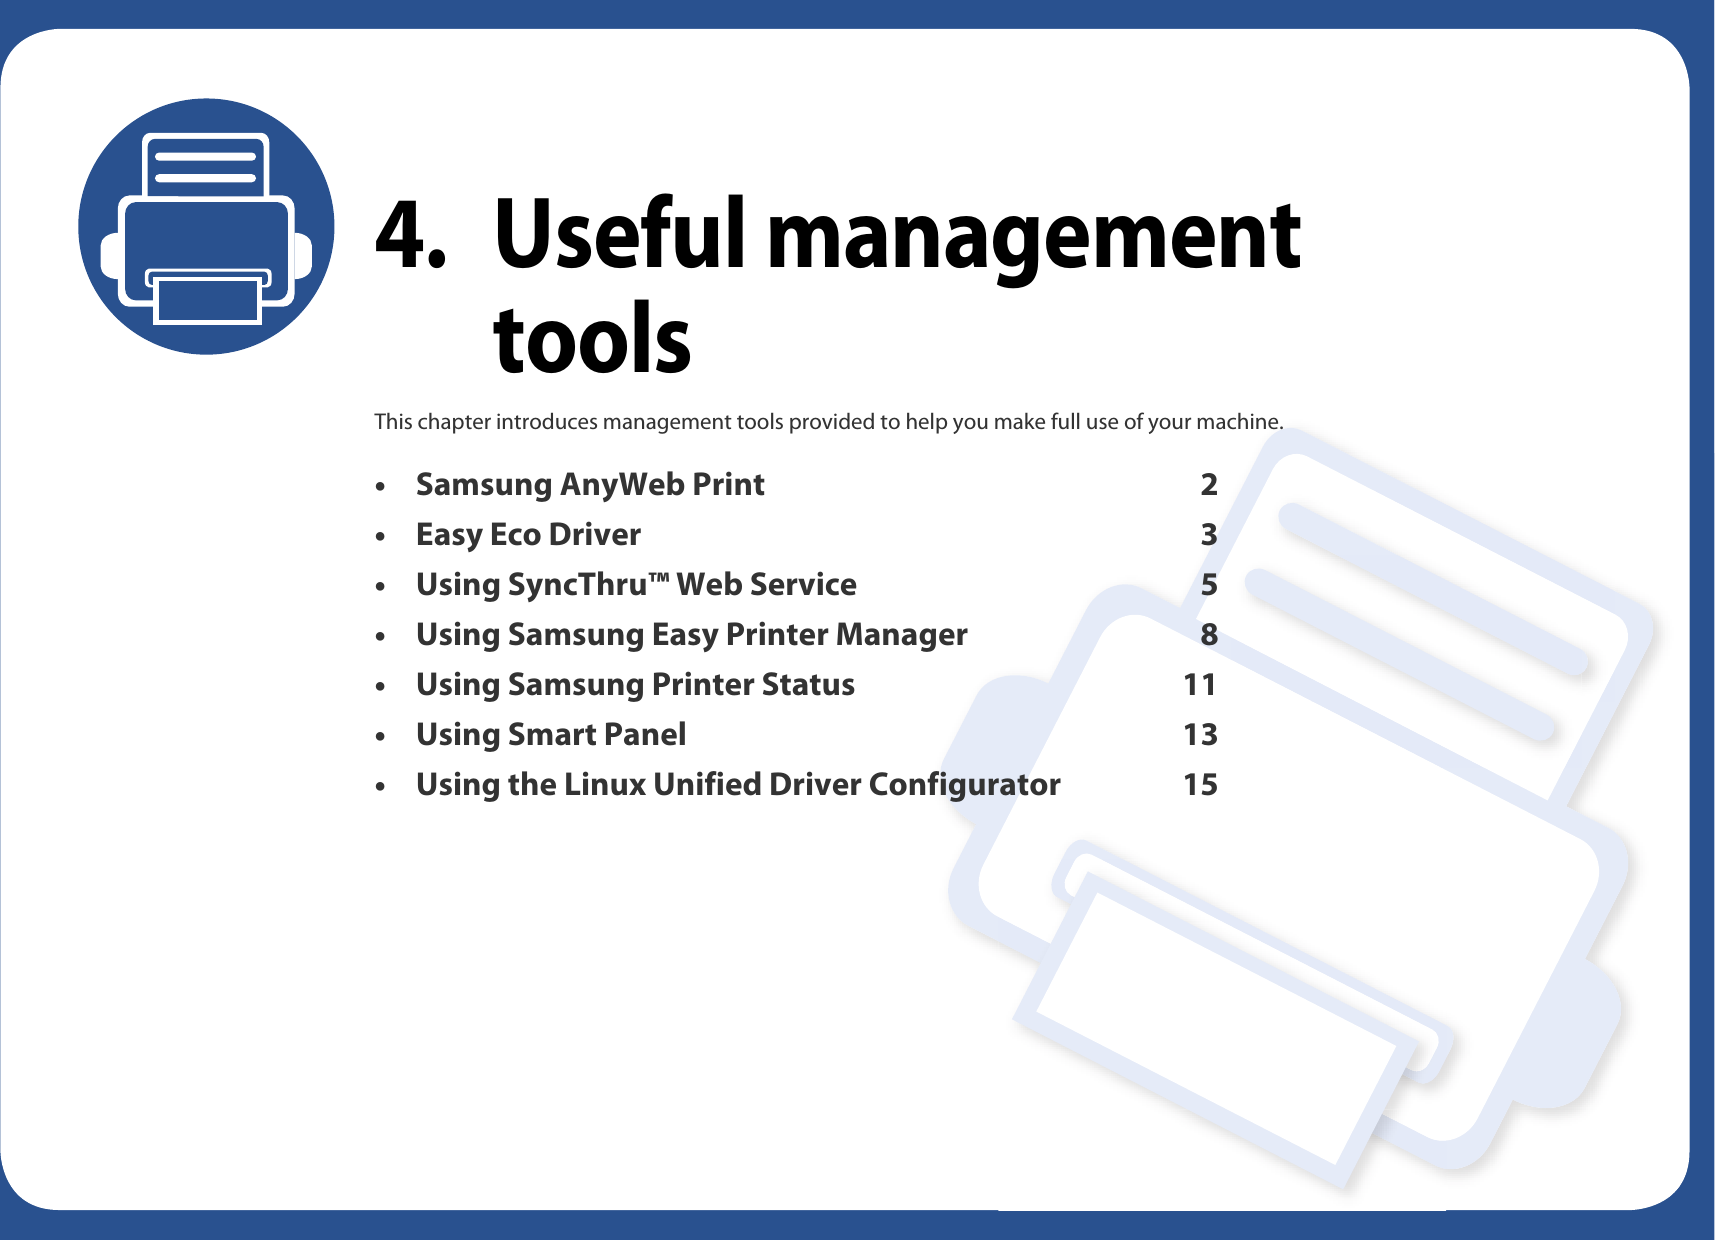 4. Useful management toolsThis chapter introduces management tools provided to help you make full use of your machine. • Samsung AnyWeb Print 2• Easy Eco Driver 3• Using SyncThru™ Web Service 5• Using Samsung Easy Printer Manager 8 • Using Samsung Printer Status 11• Using Smart Panel 13• Using the Linux Unified Driver Configurator 15